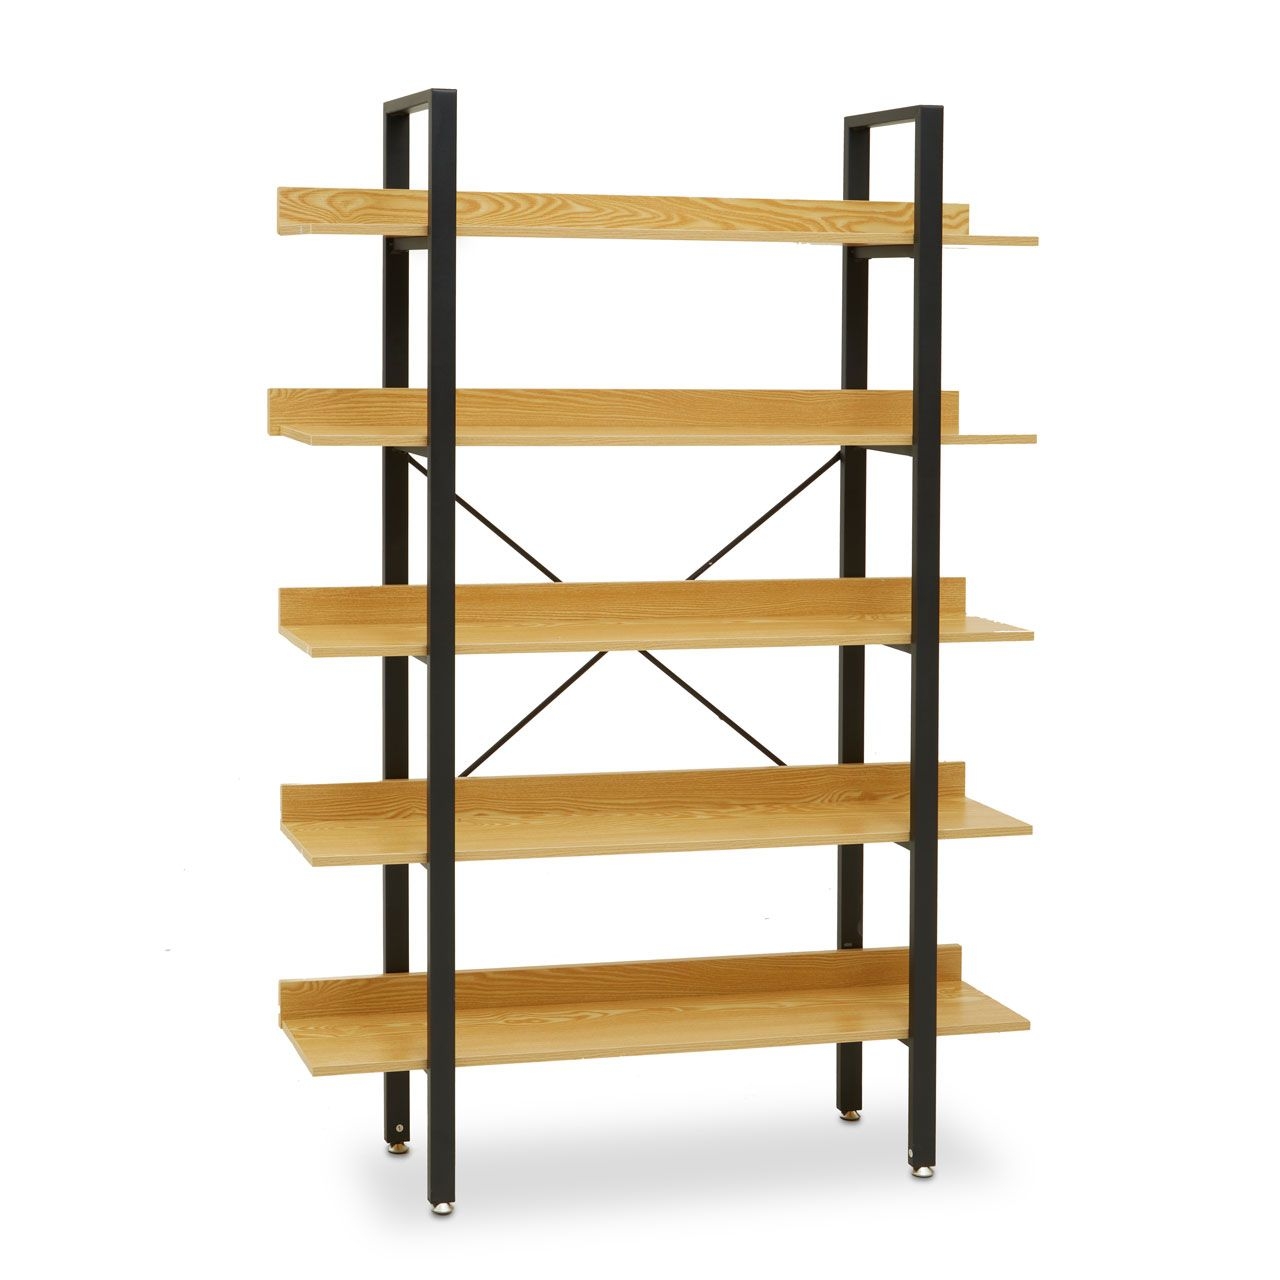 Laxton 5 Tier Wooden Shelving Unit In Light Yellow With Black Frame